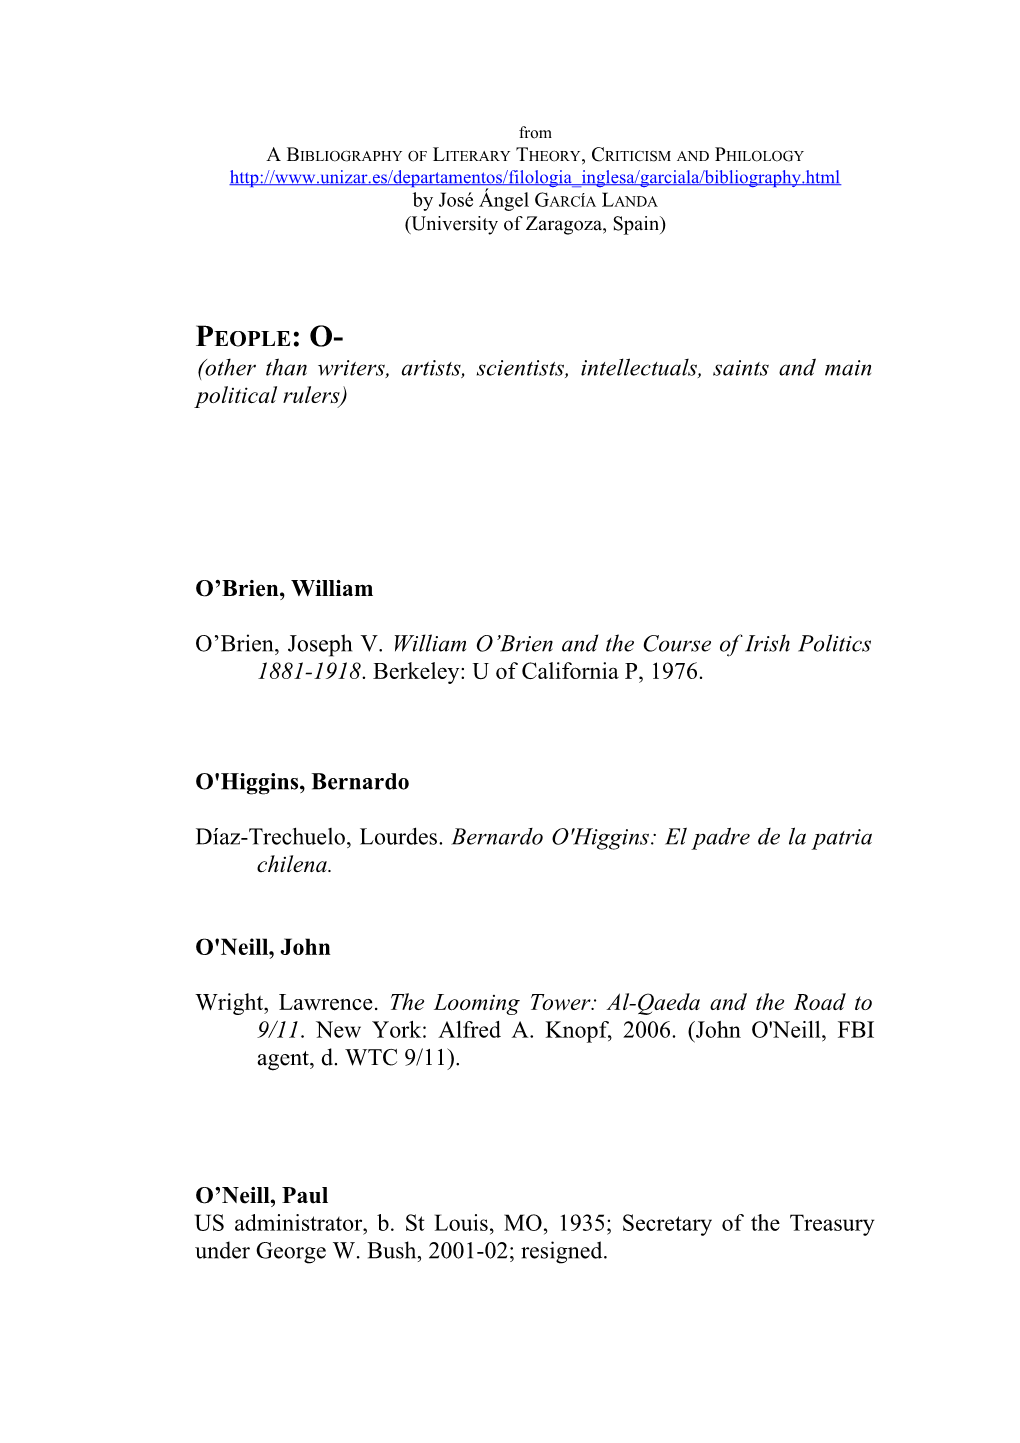 From a Bibliography of Literary Theory, Criticism and Philology (10Th Ed s1